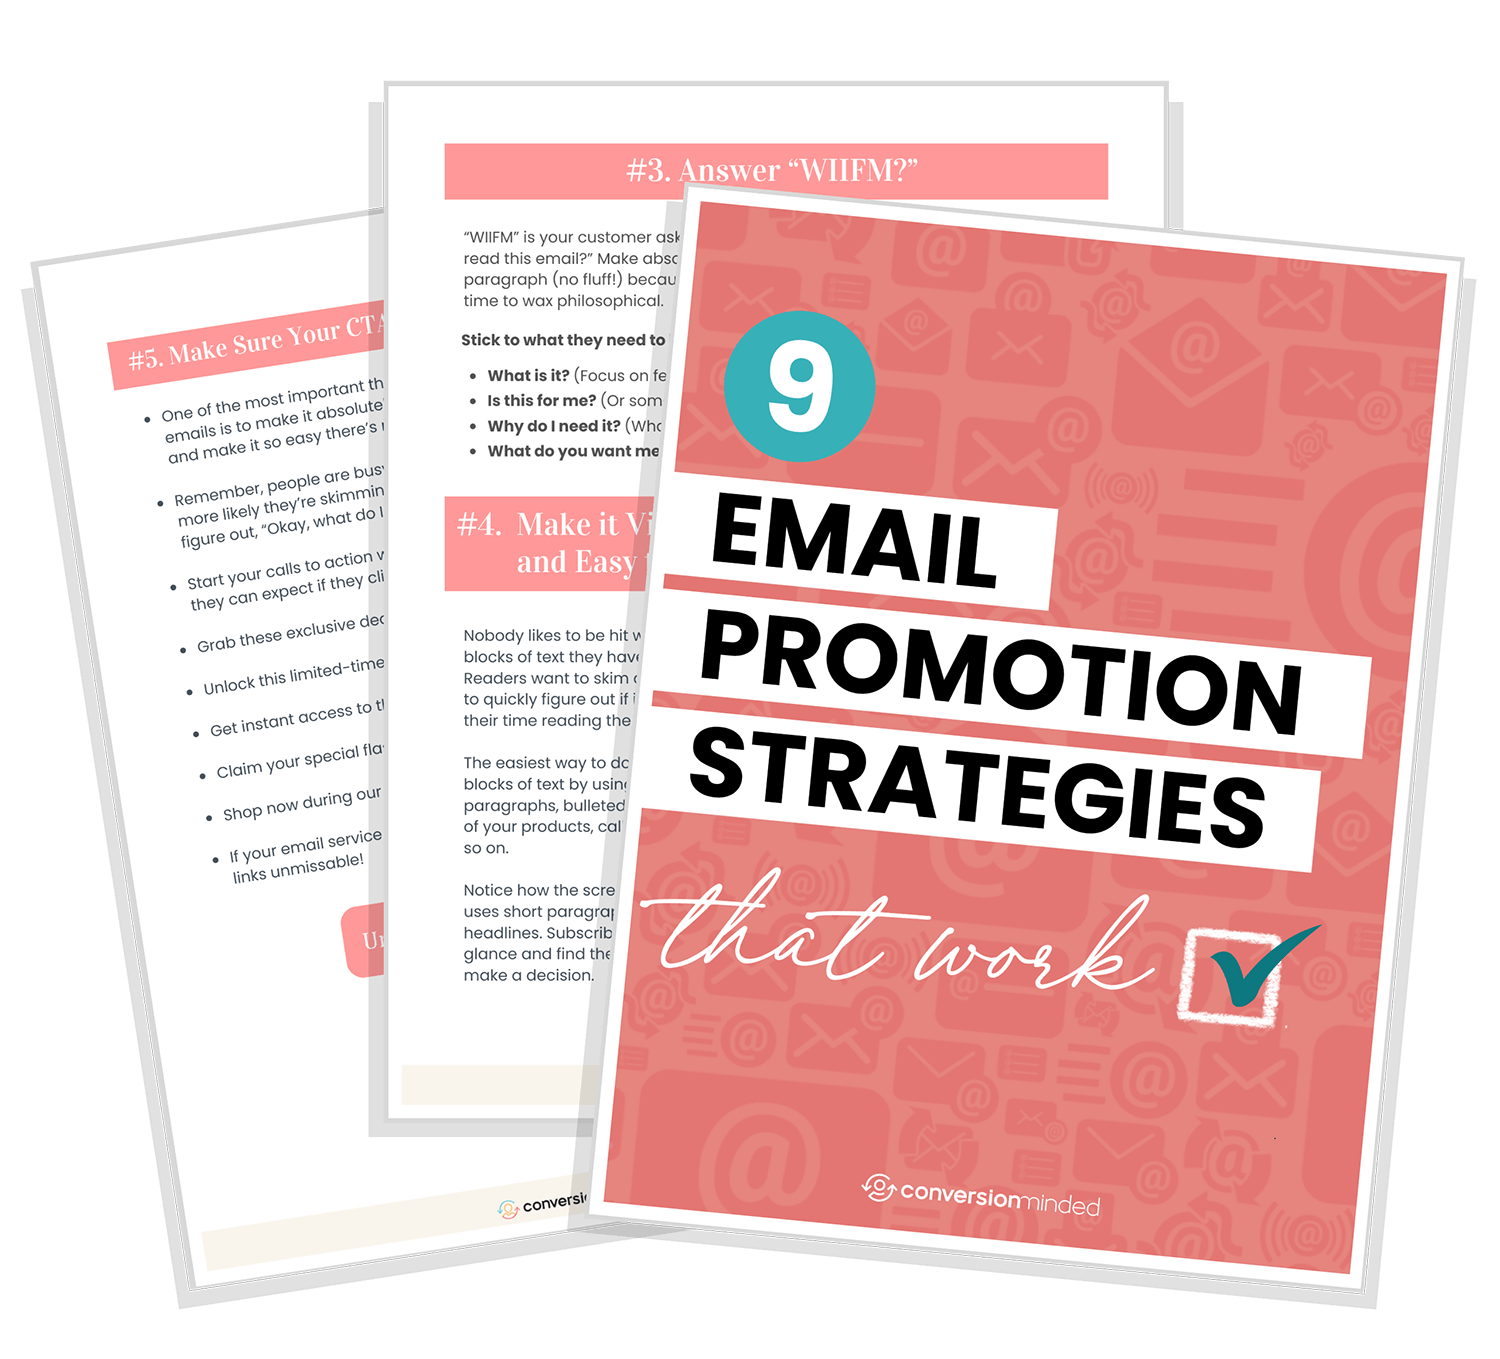 Email Promo Strategies by ConversionMinded